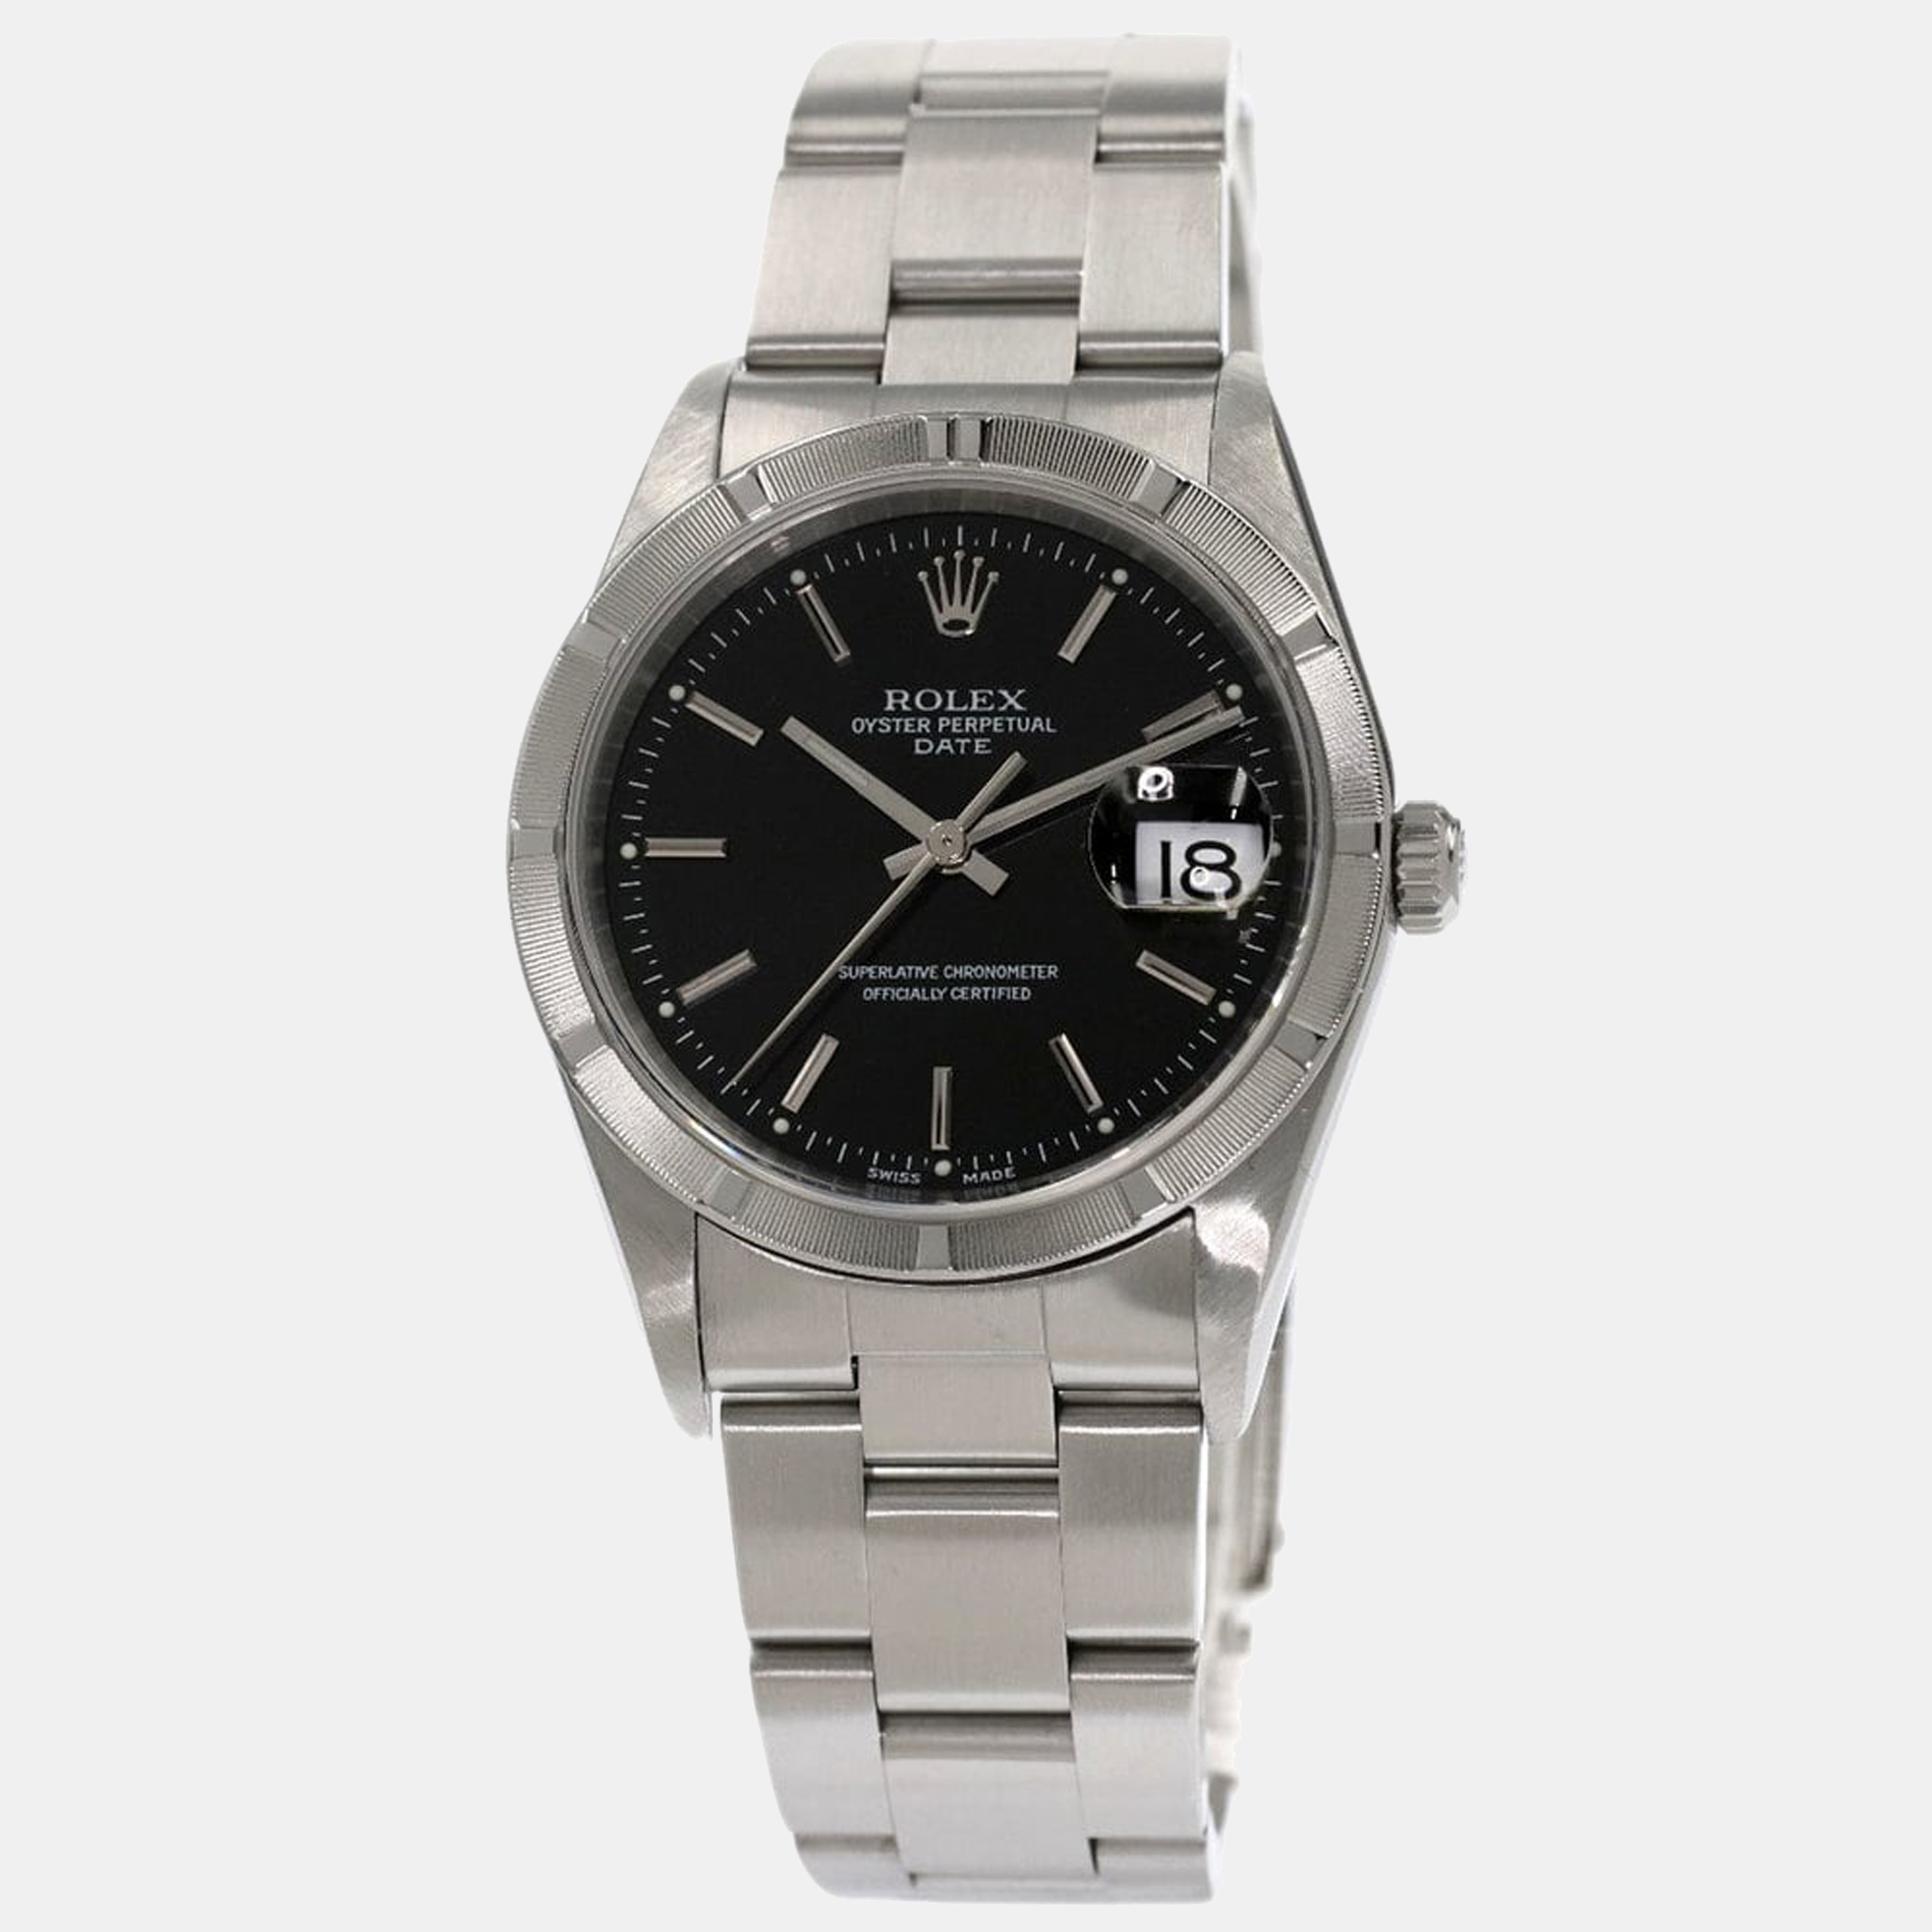 Rolex Black Stainless Steel Oyster Perpetual Date 15210 Men's Wristwatch 34 Mm